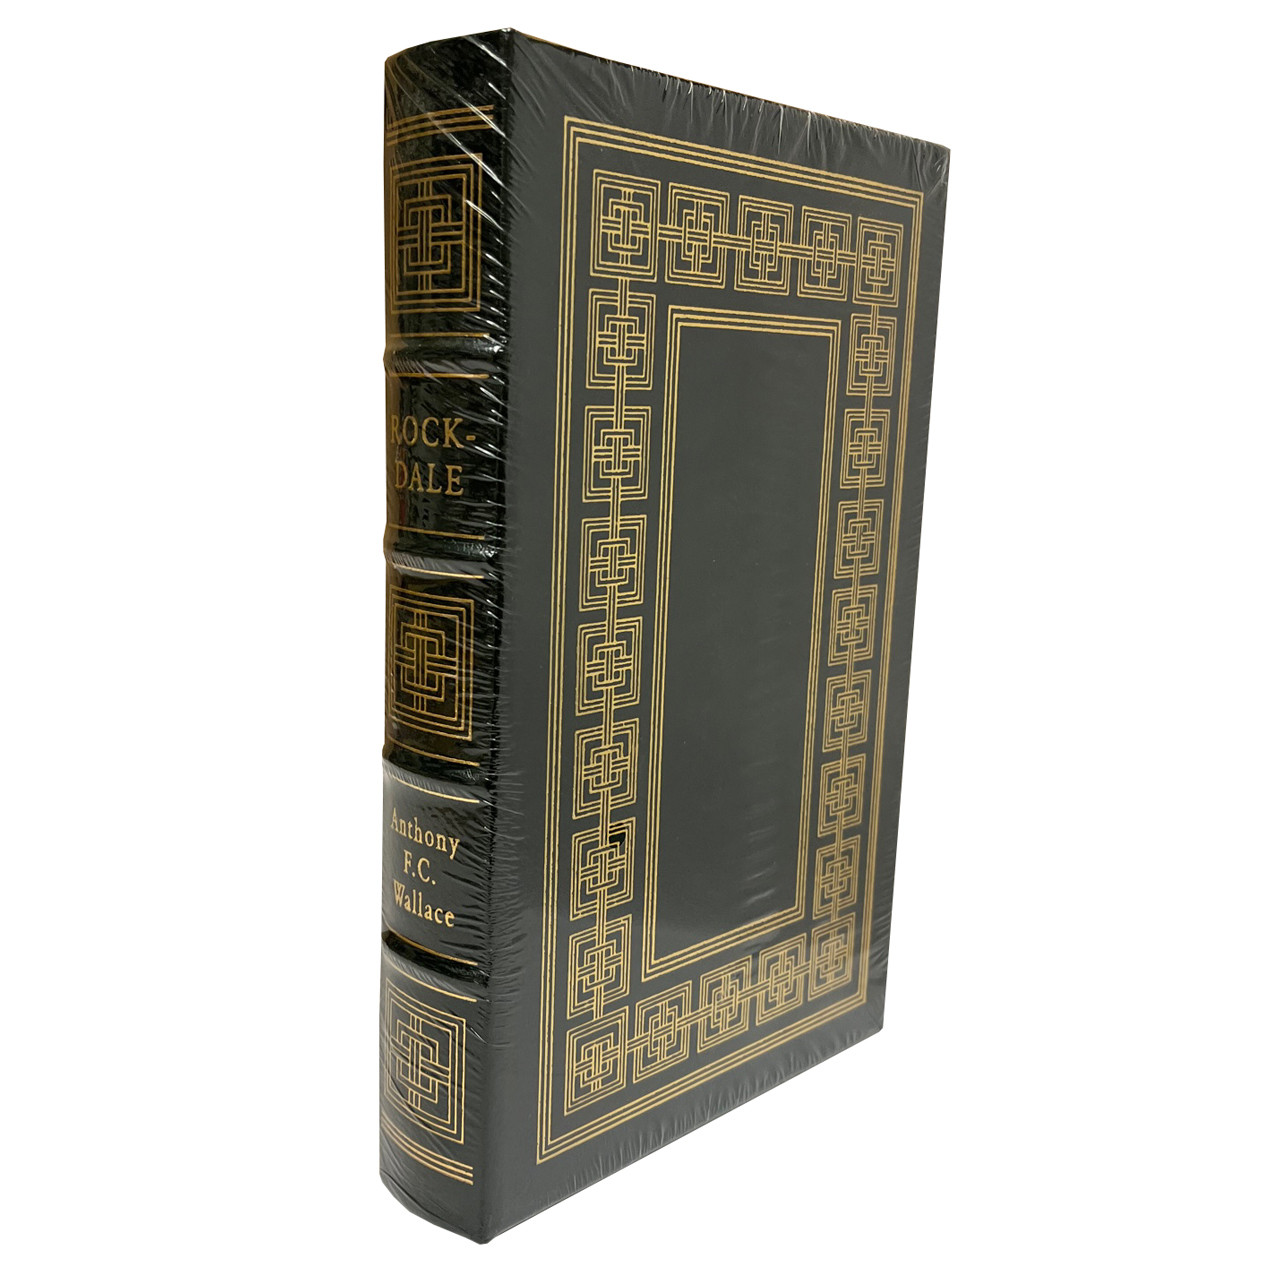 Anthony F.C. Wallace "Rockdale" Limited Edition, Leather Bound Collector's Edition [Sealed]